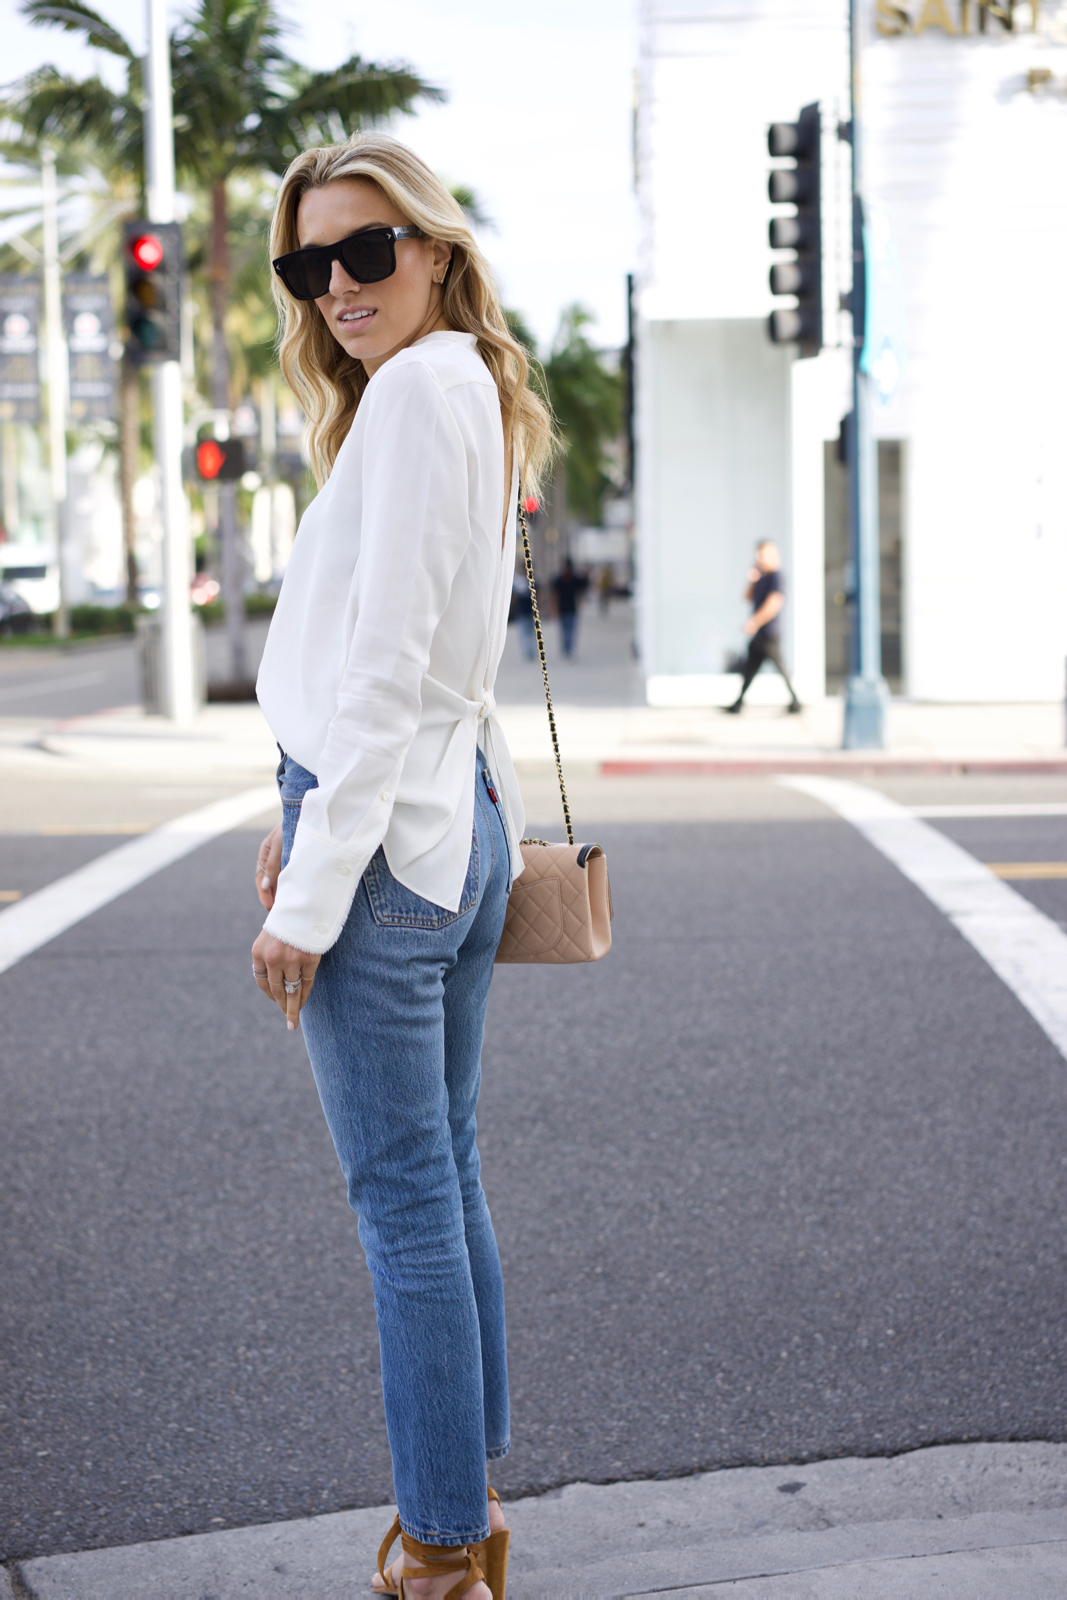 Helmut Lang Open Back Top, Levi's Jean, Chanel shoes and bag, Givenchy, Gianvito Rossi Shoes, Los Angeles, California